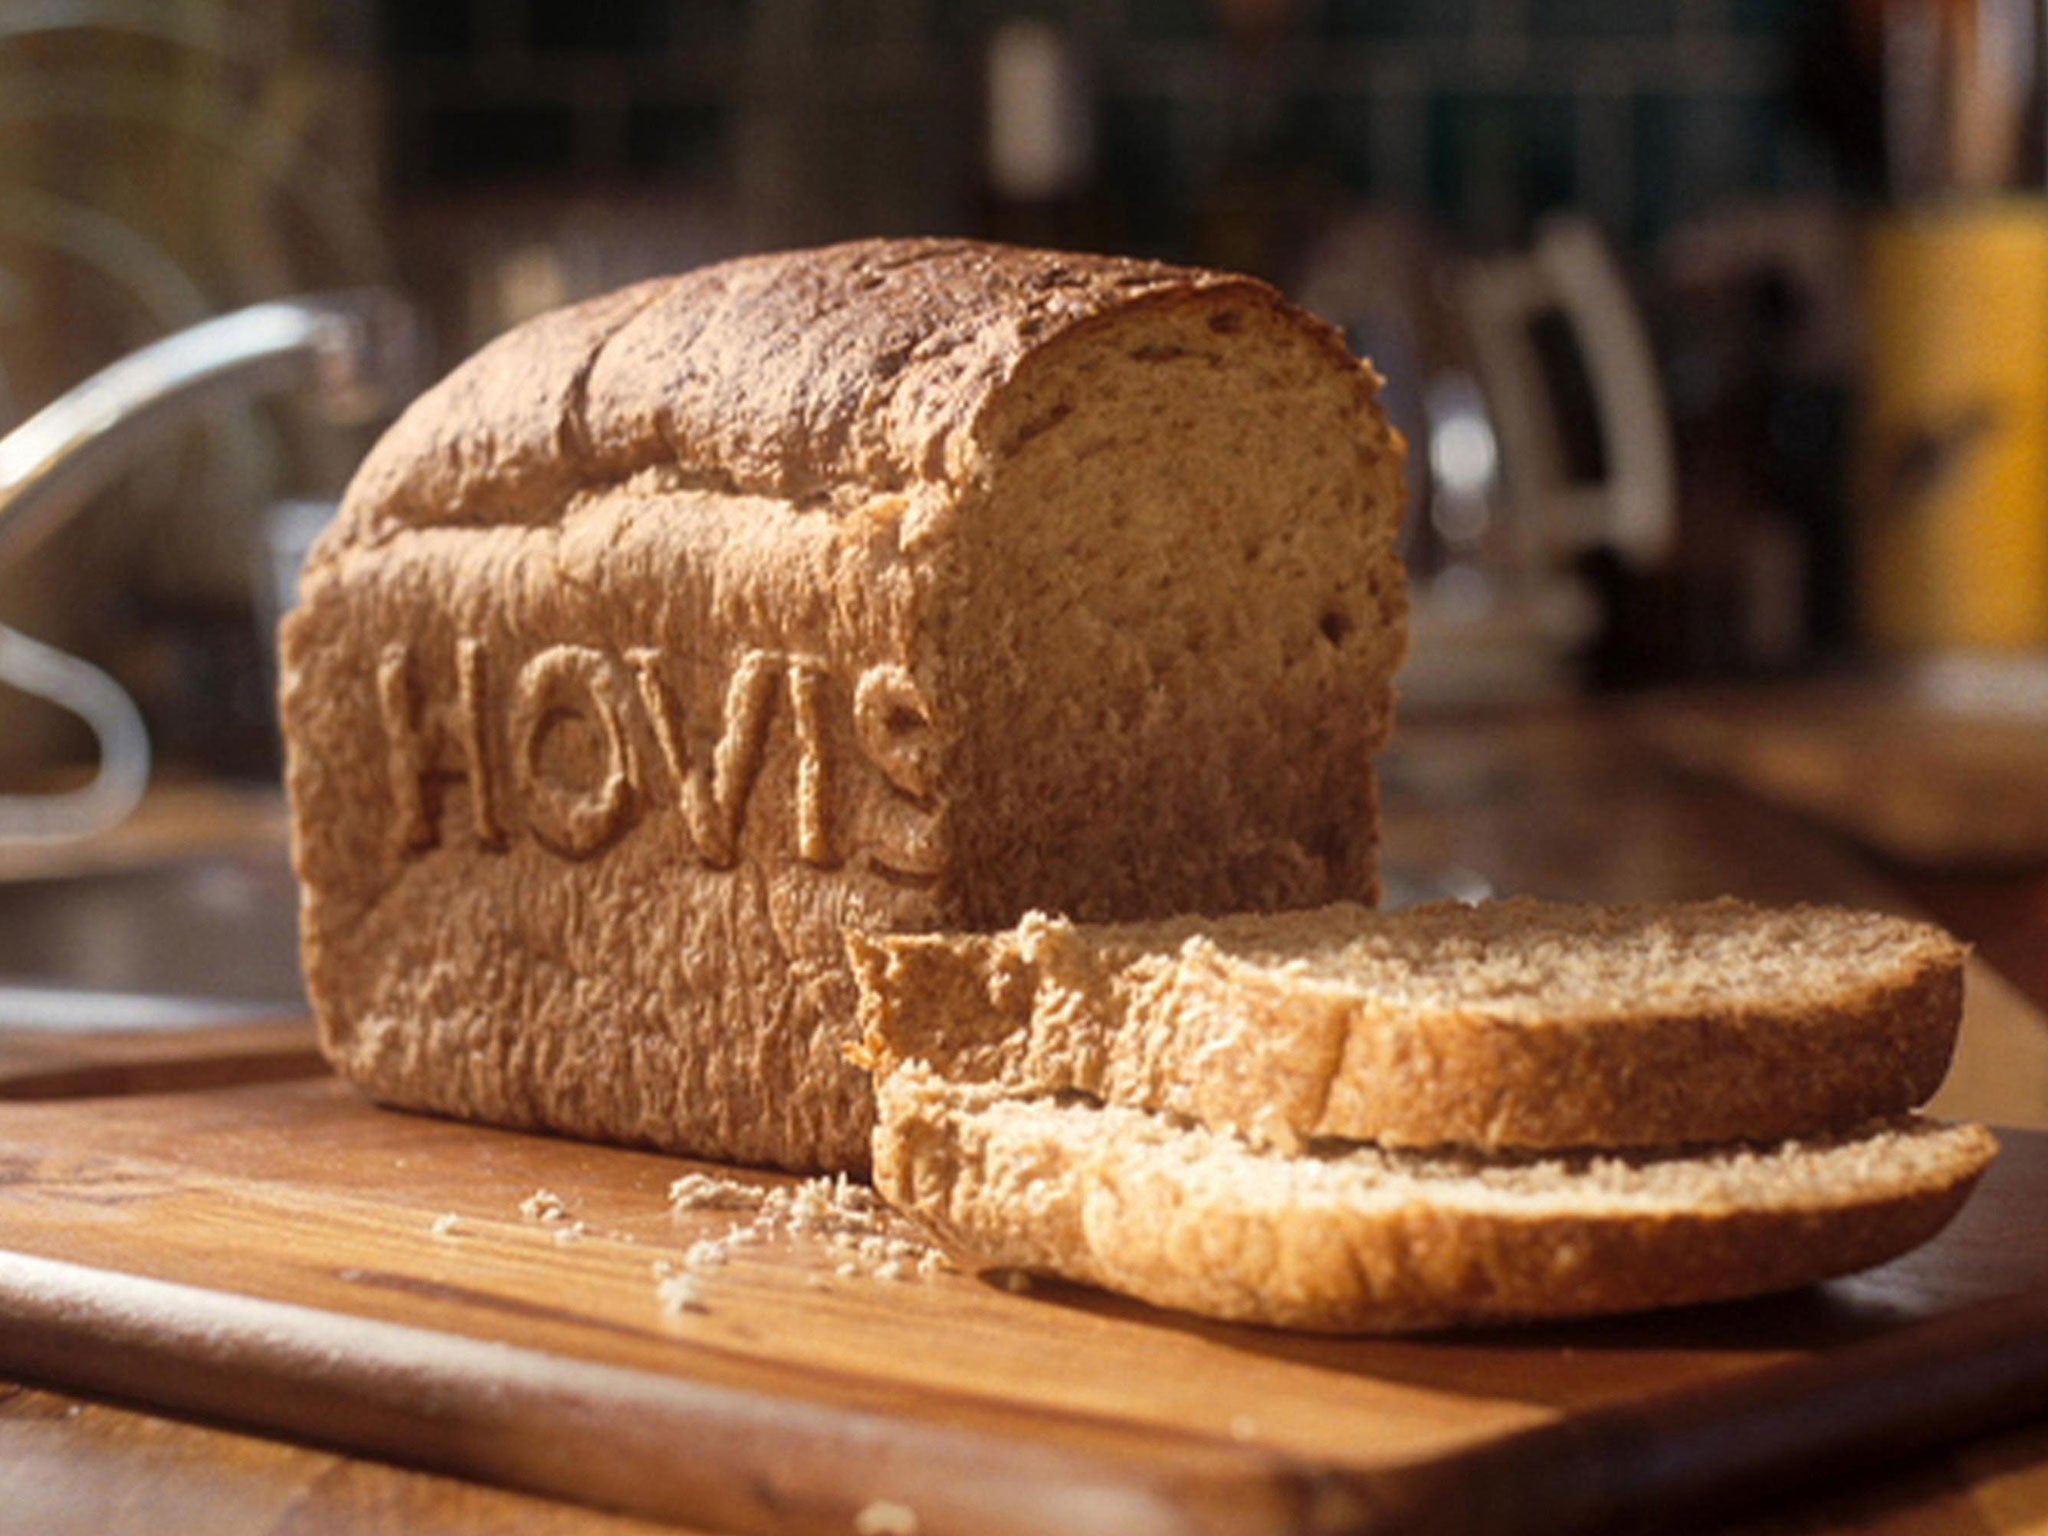 A loaf of Hovis bread. But is it rustic?